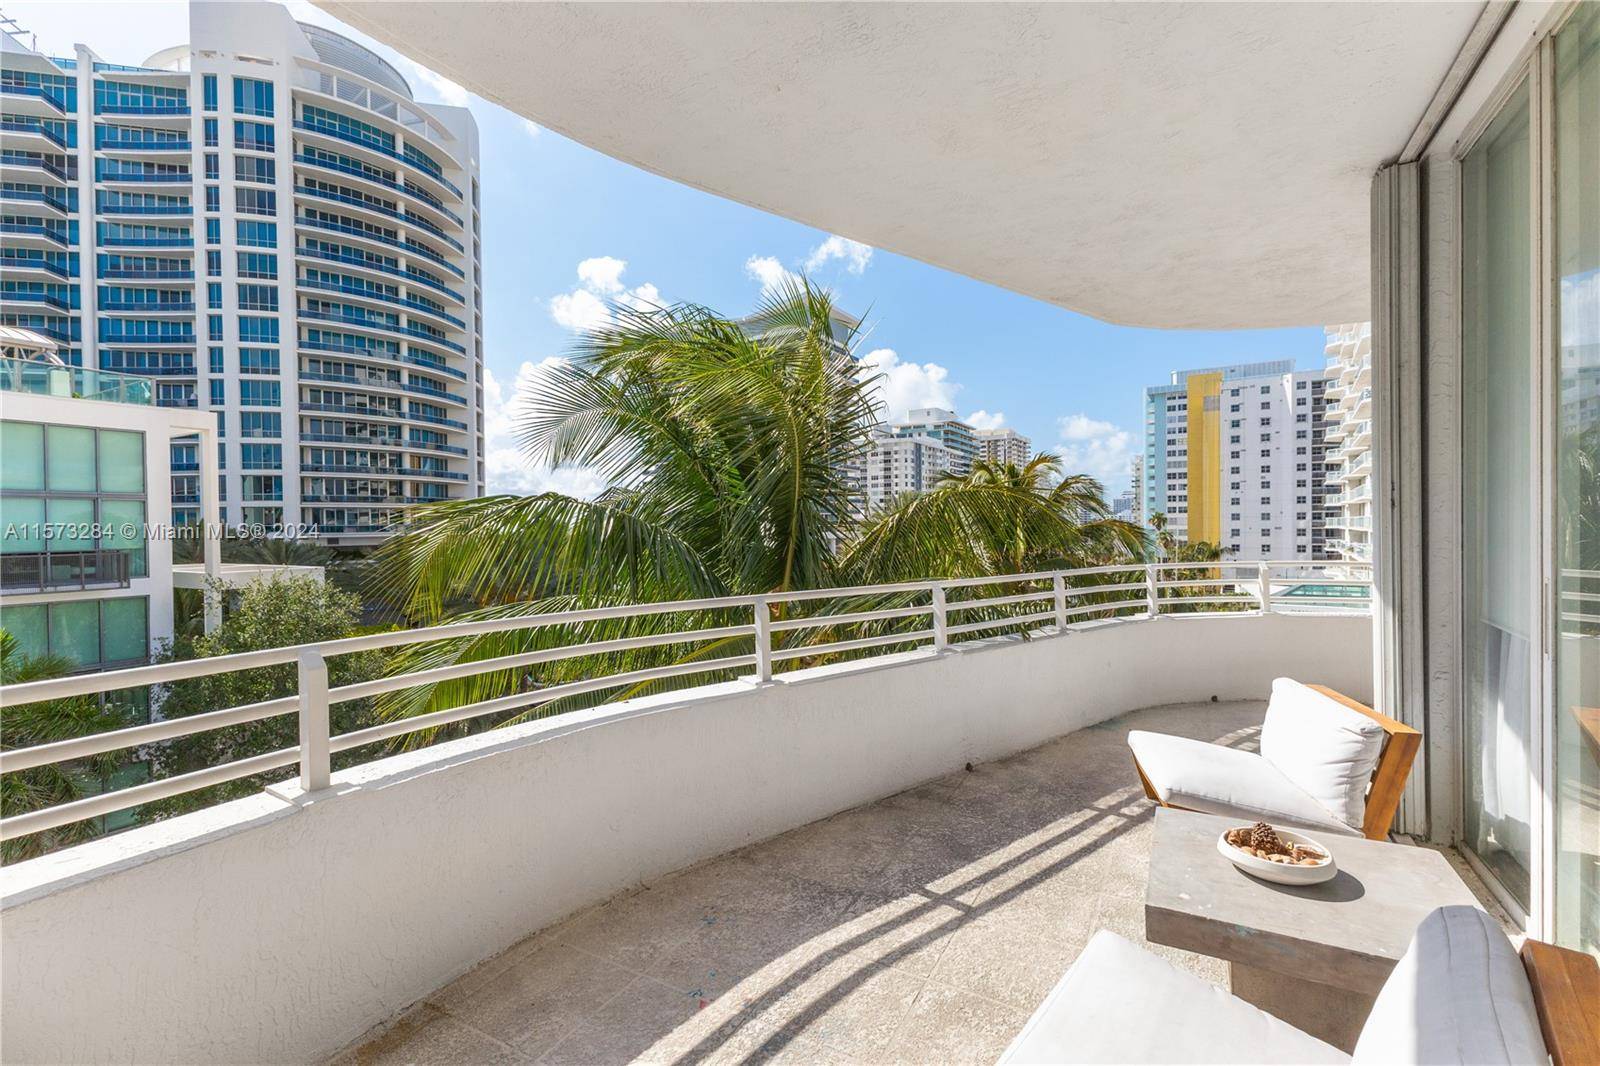 Gorgeous spacious three bedroom, three bathroom corner w high ceilings, floor to ceiling glass, two terraces including large wraparound w beautiful water views.